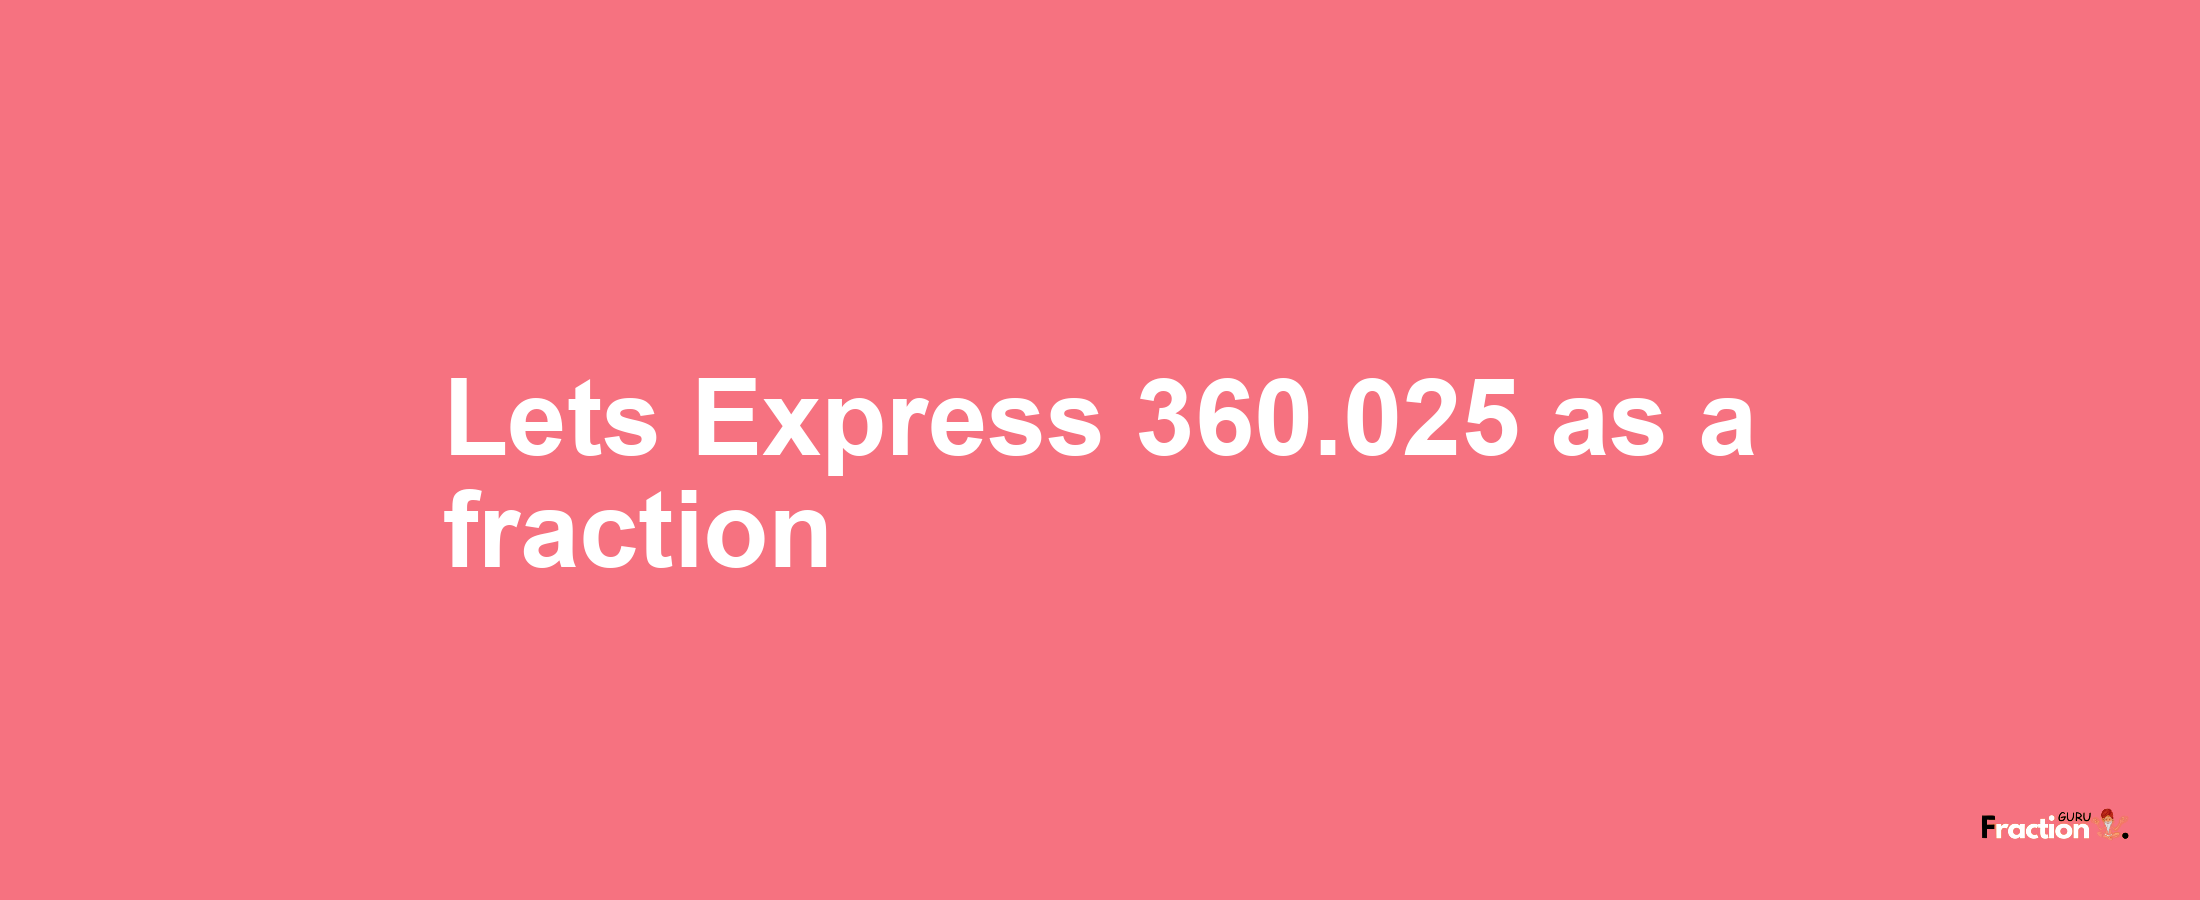 Lets Express 360.025 as afraction